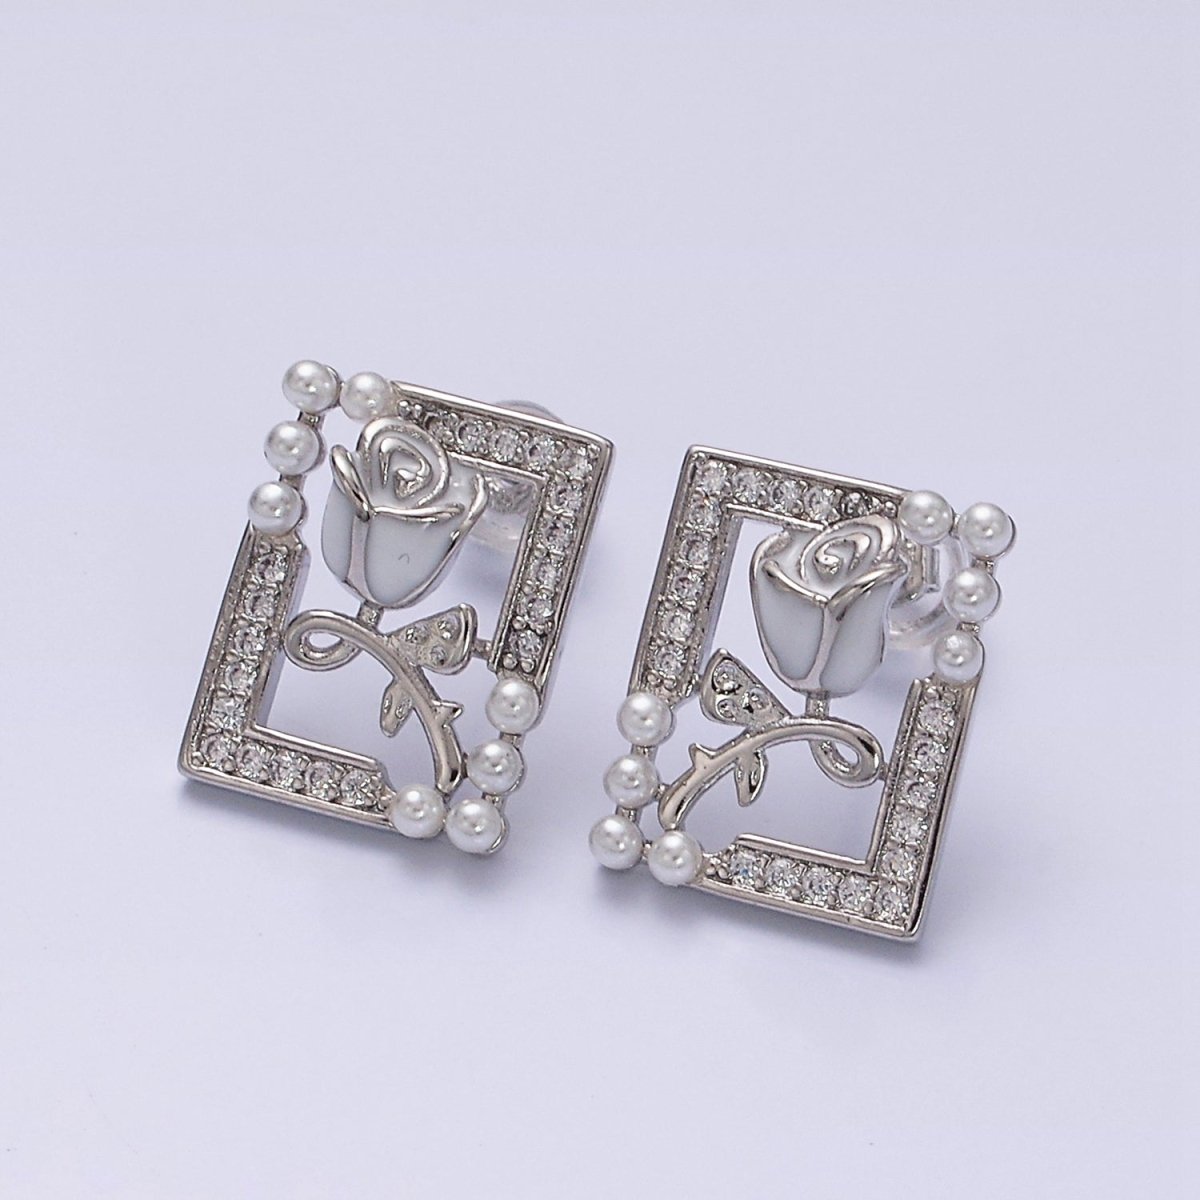 Gold, Silver Rose Flower White Enamel Pearl Micro Paved Open Rectangular Stud Earrings | AD970 AD971 - DLUXCA